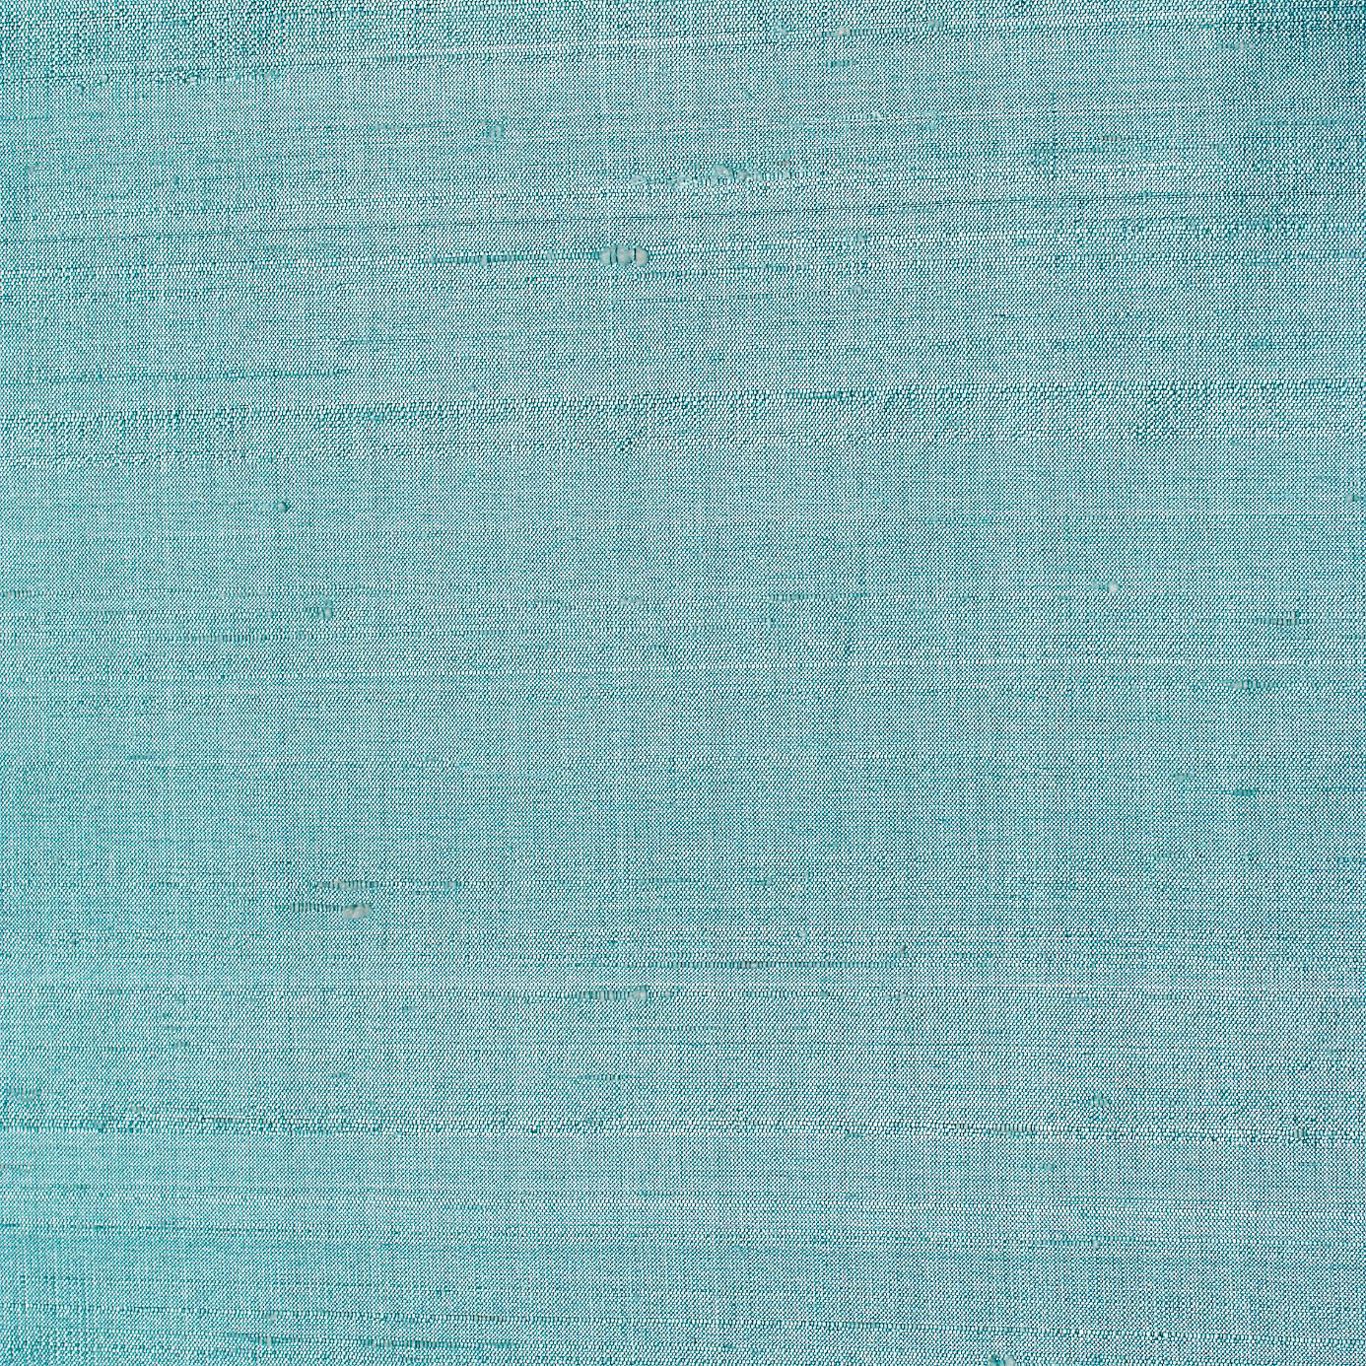 Lilaea Silks Turquoise Fabric by HAR